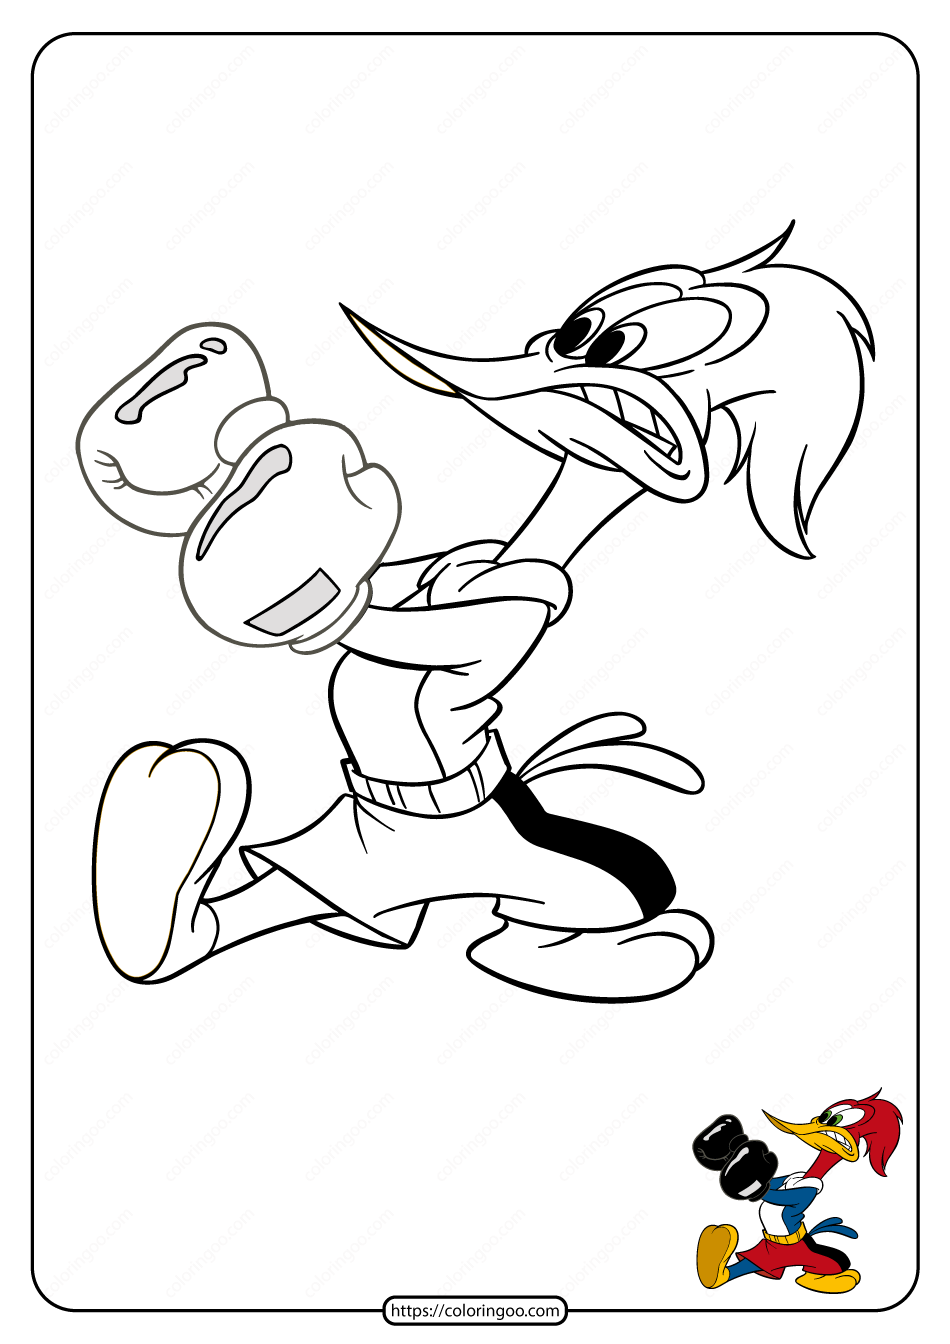 Woody Woodpecker Boxing Coloring Pages